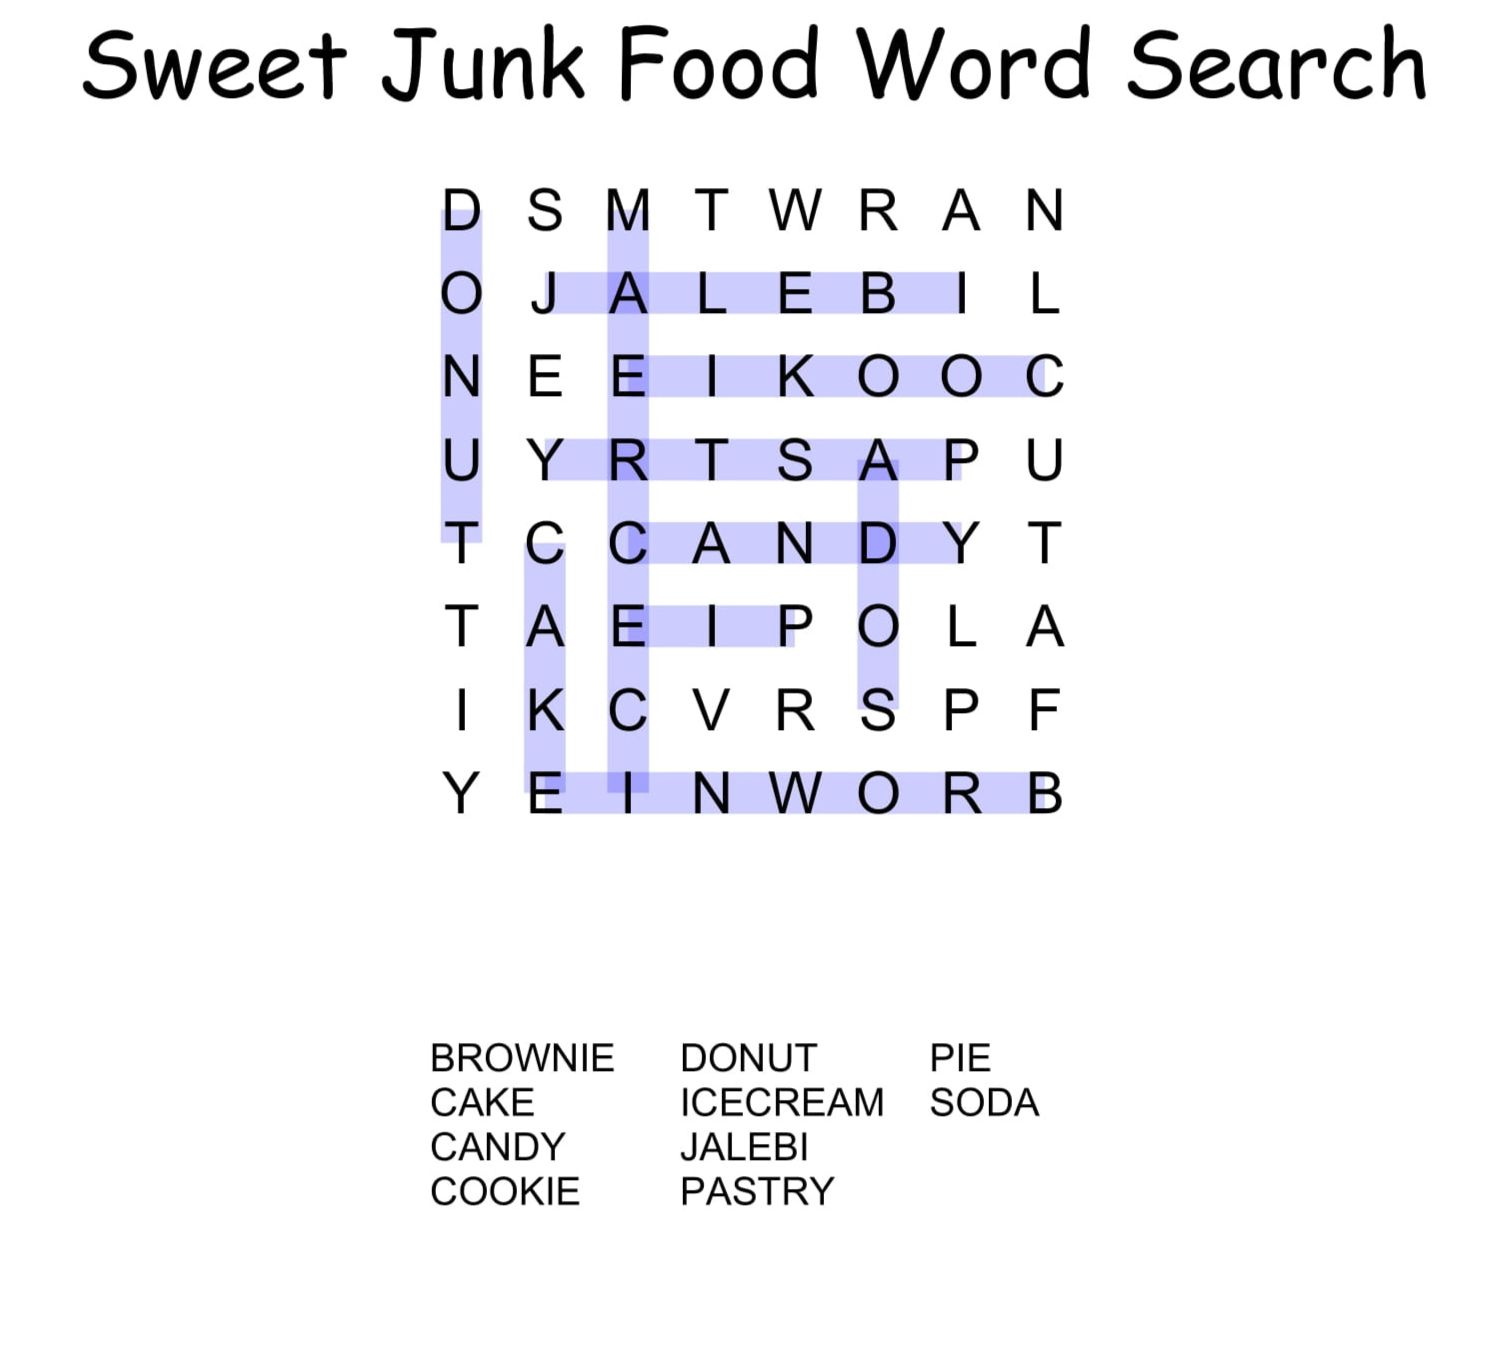 sweet junk food word search puzzle solution